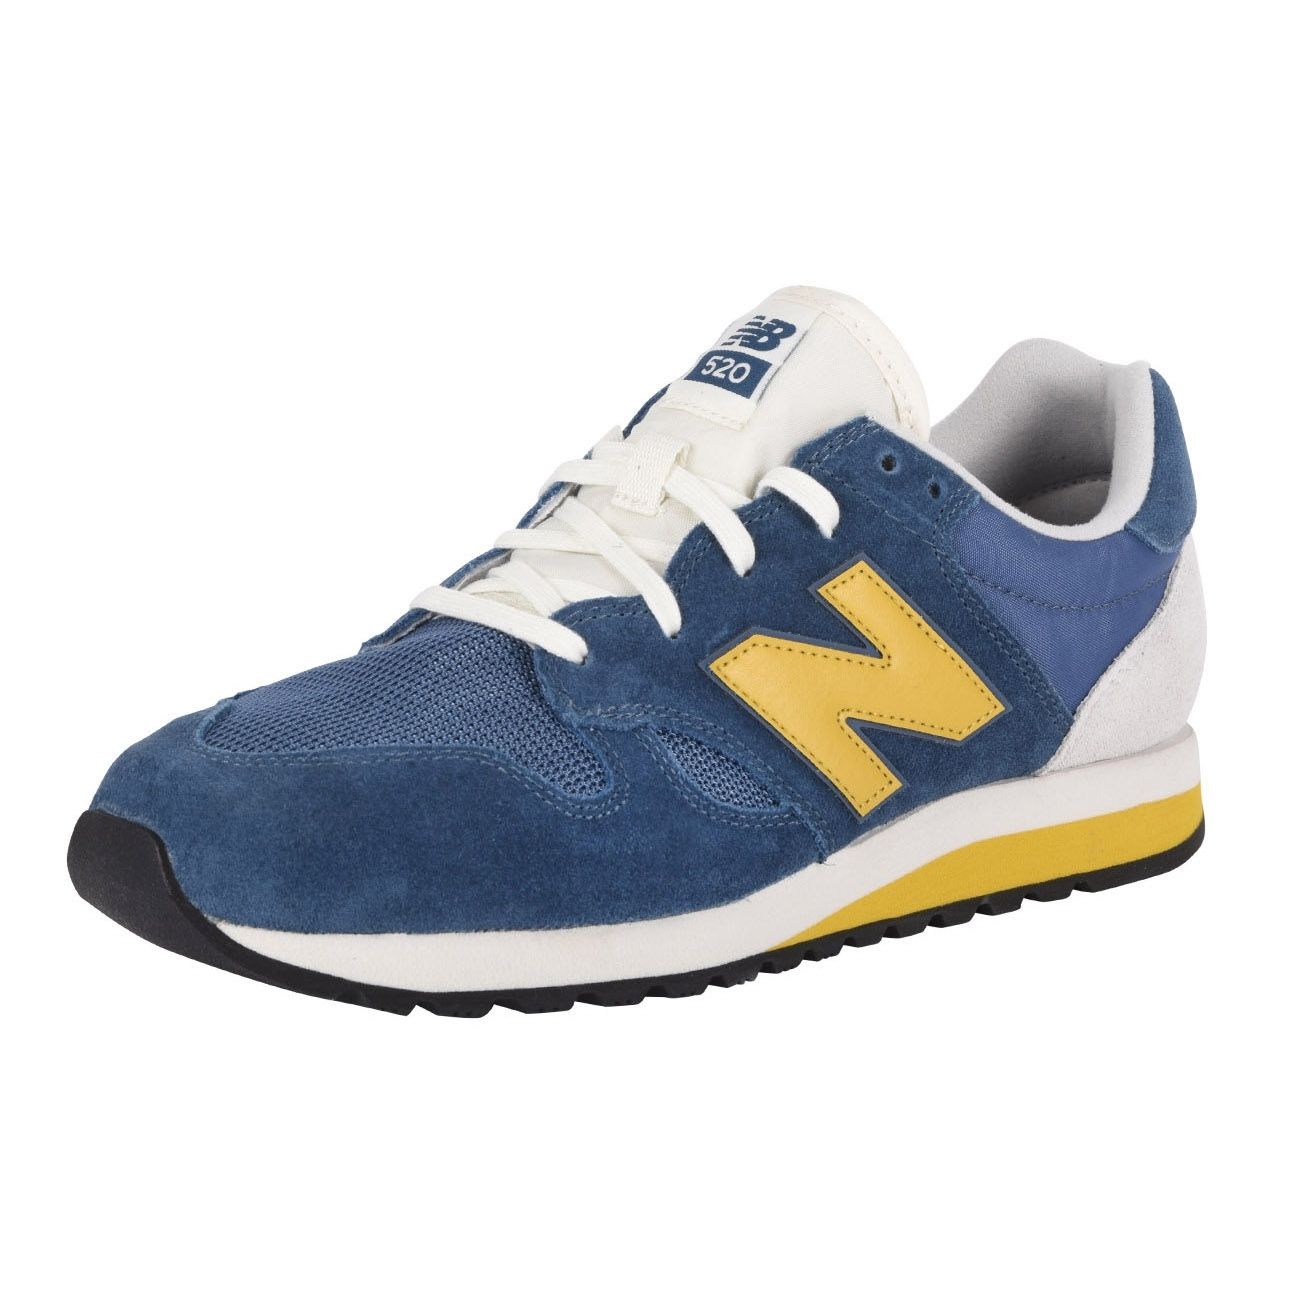 NEW BALANCE 574 70s RUNNING SUEDE MESH SNEAKERS Man Blue yellow ...